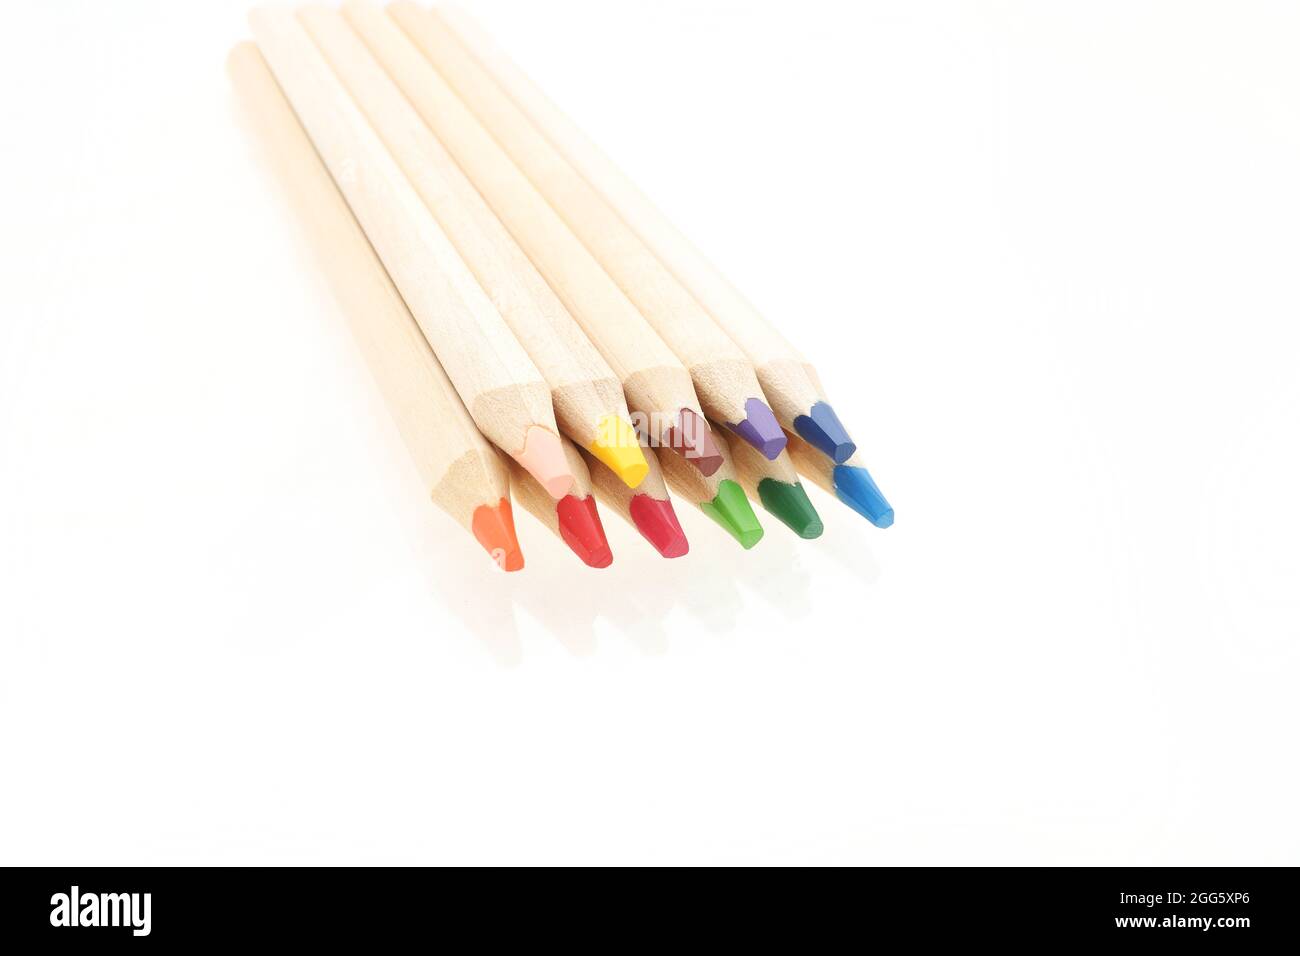 Wooden colorful pencils isolated on white Stock Photo